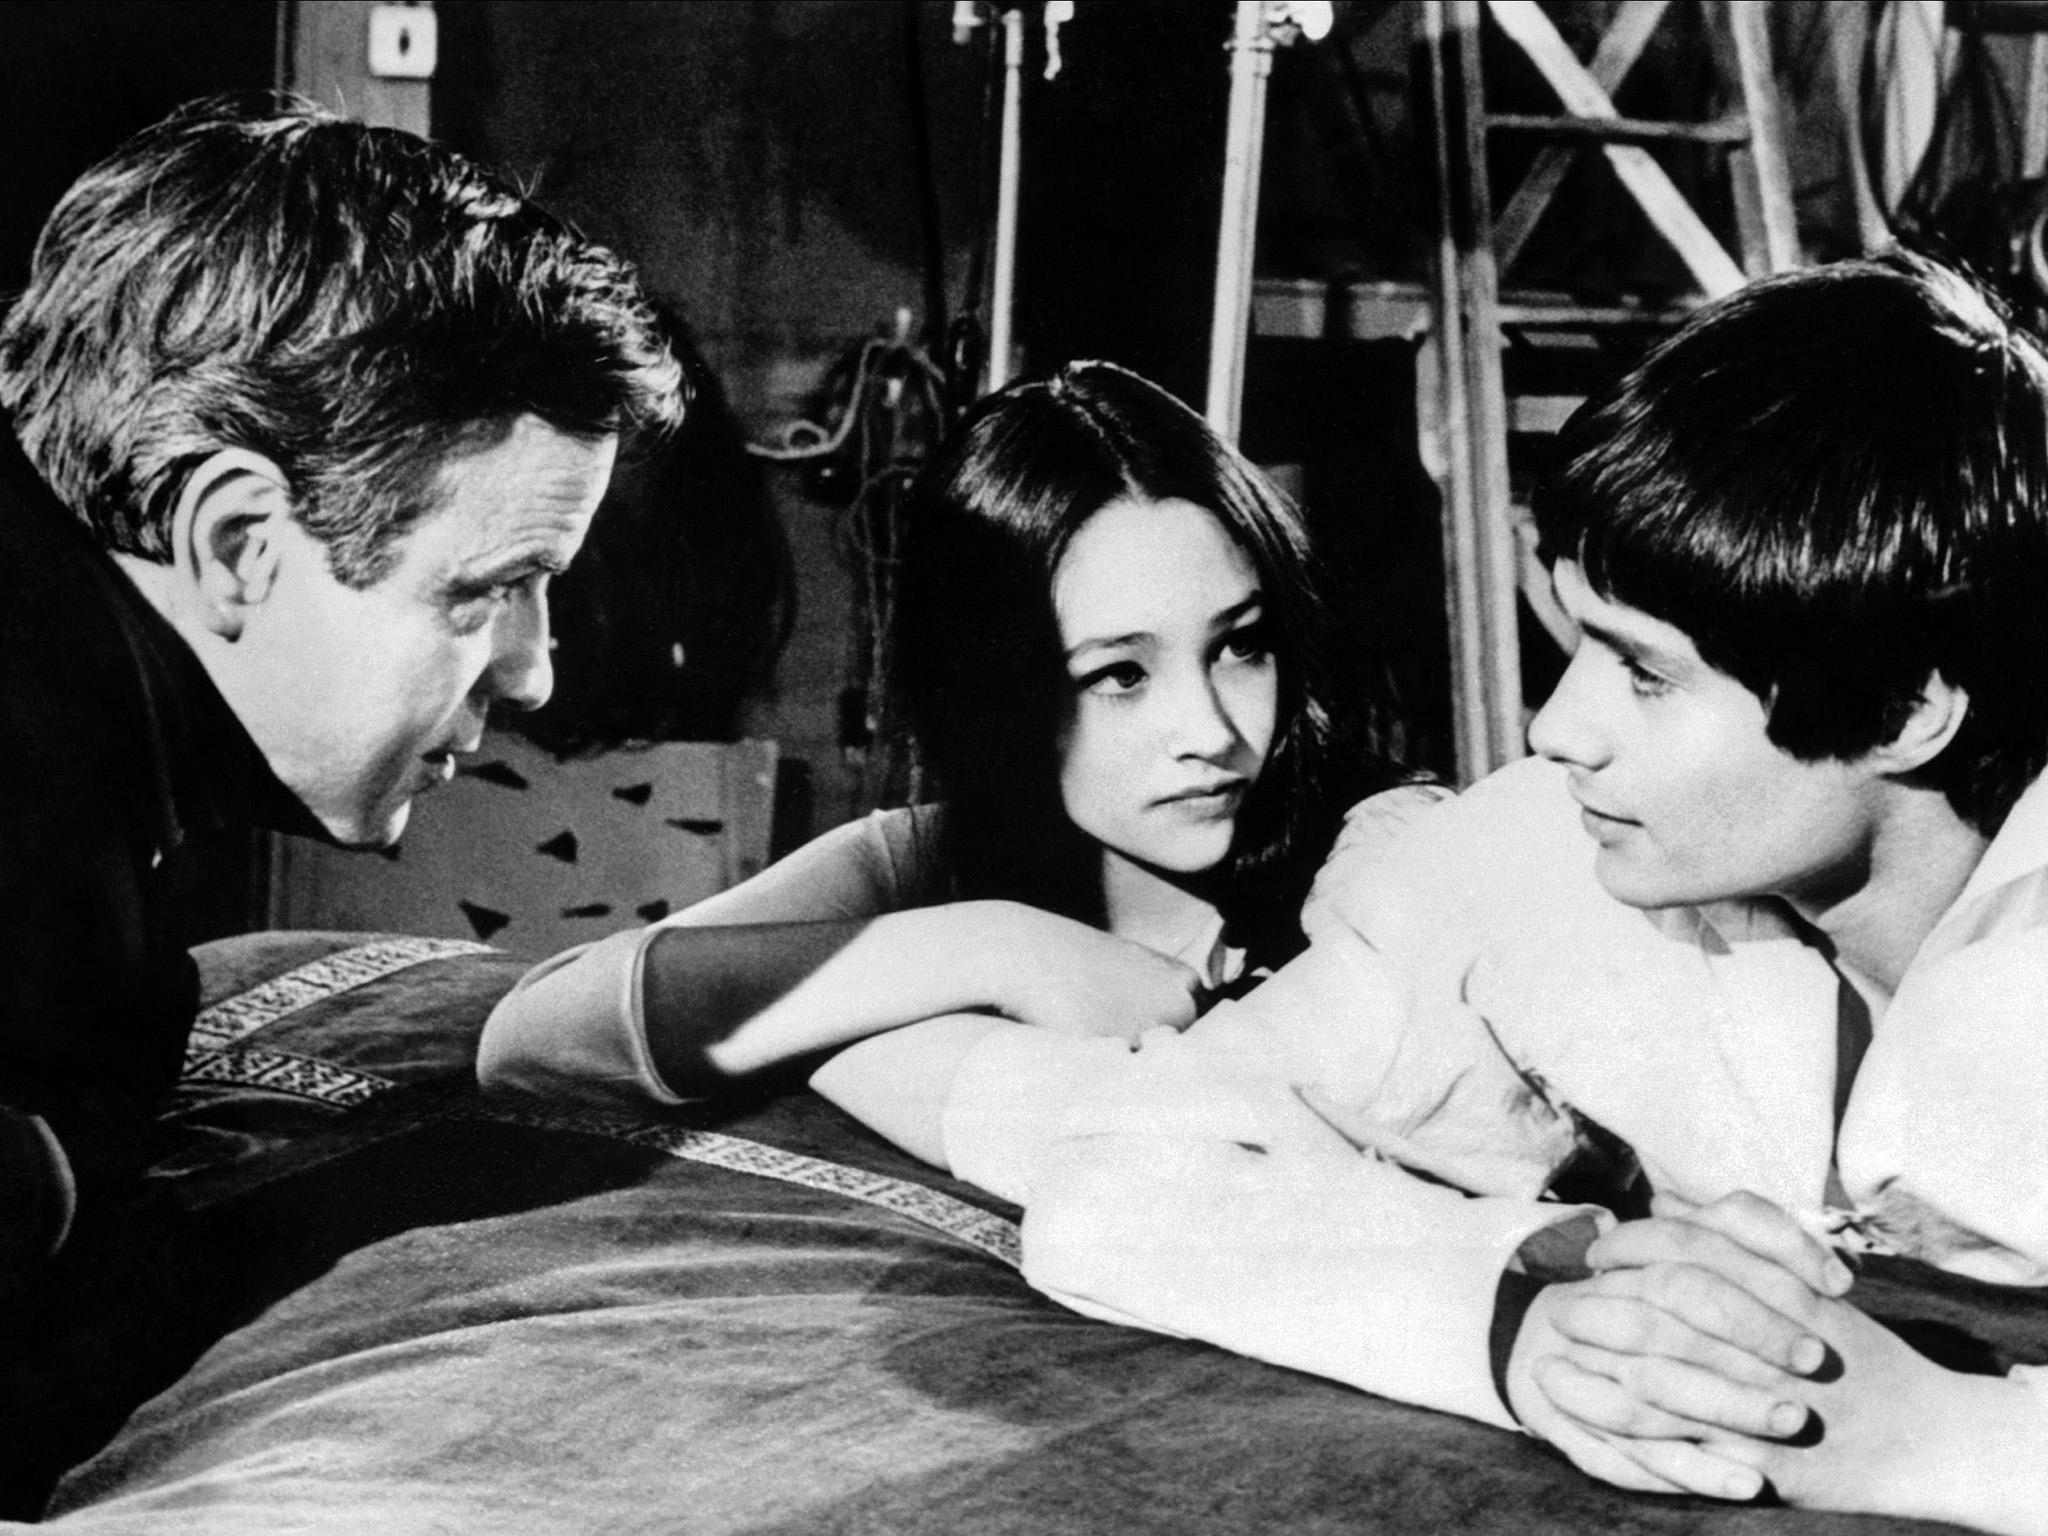 Zeffirelli with Olivia Hussey and Leonard Whiting on the set of his breakthrough film, ‘Romeo and Juliet’, 1968